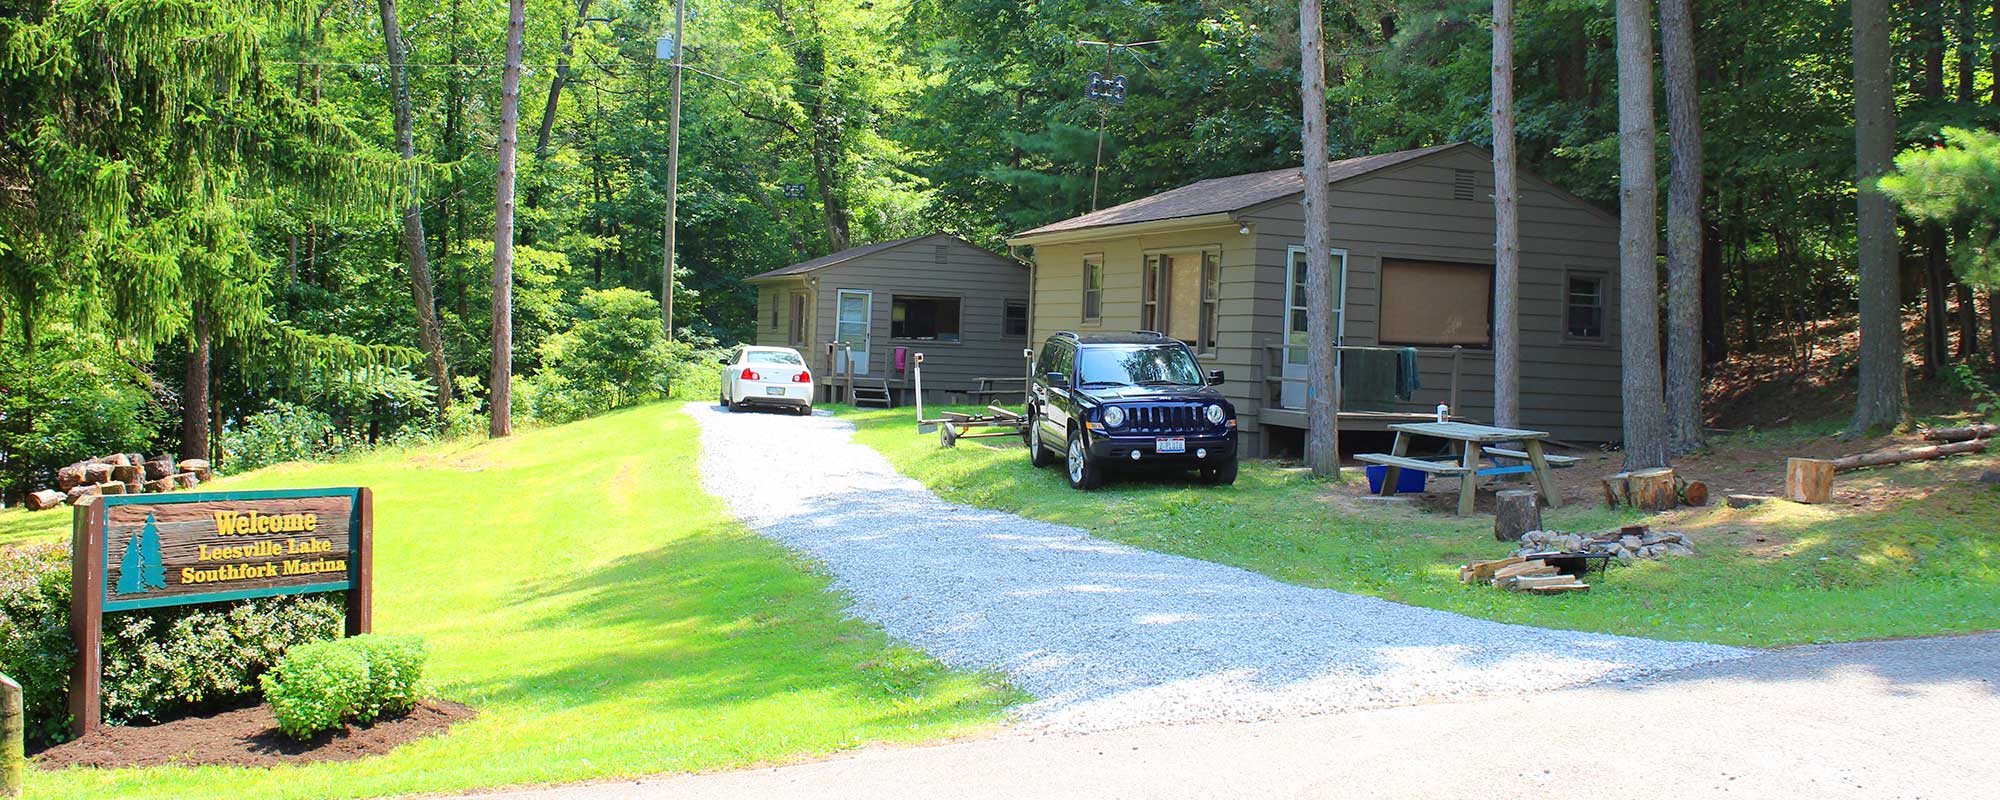 masterpiece dam Sportsman Cozy Ohio rental cabins, remote fishing cabins, family fun cottages located  by the lake and hiking trails